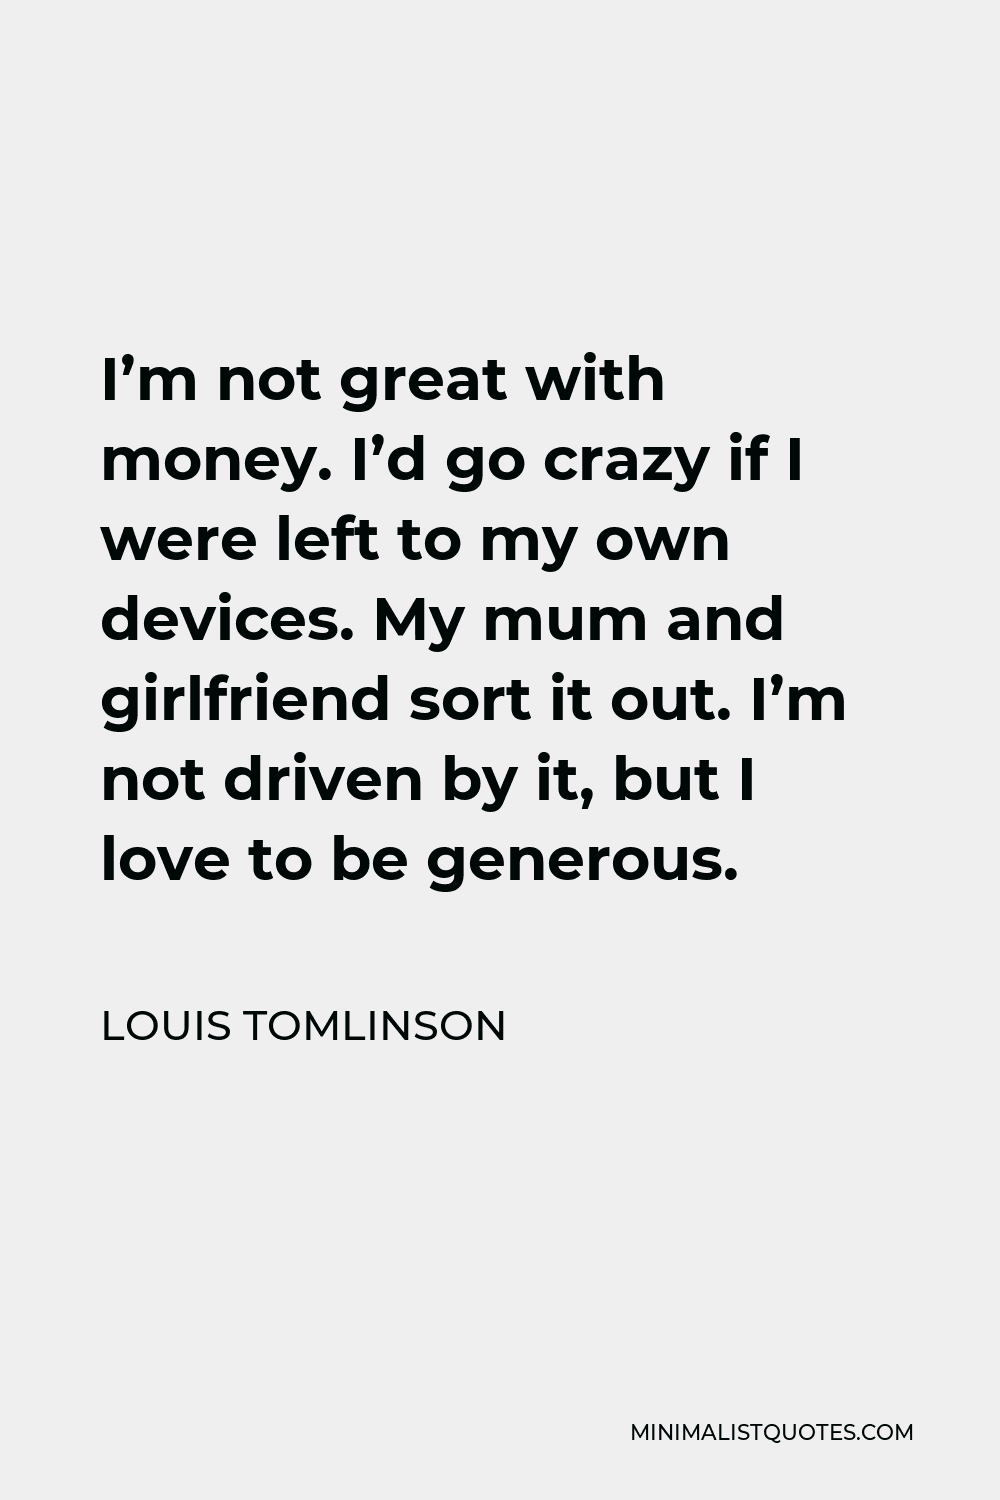 Louis Tomlinson Quote - I’m not great with money. I’d go crazy if I were left to my own devices. My mum and girlfriend sort it out. I’m not driven by it, but I love to be generous.